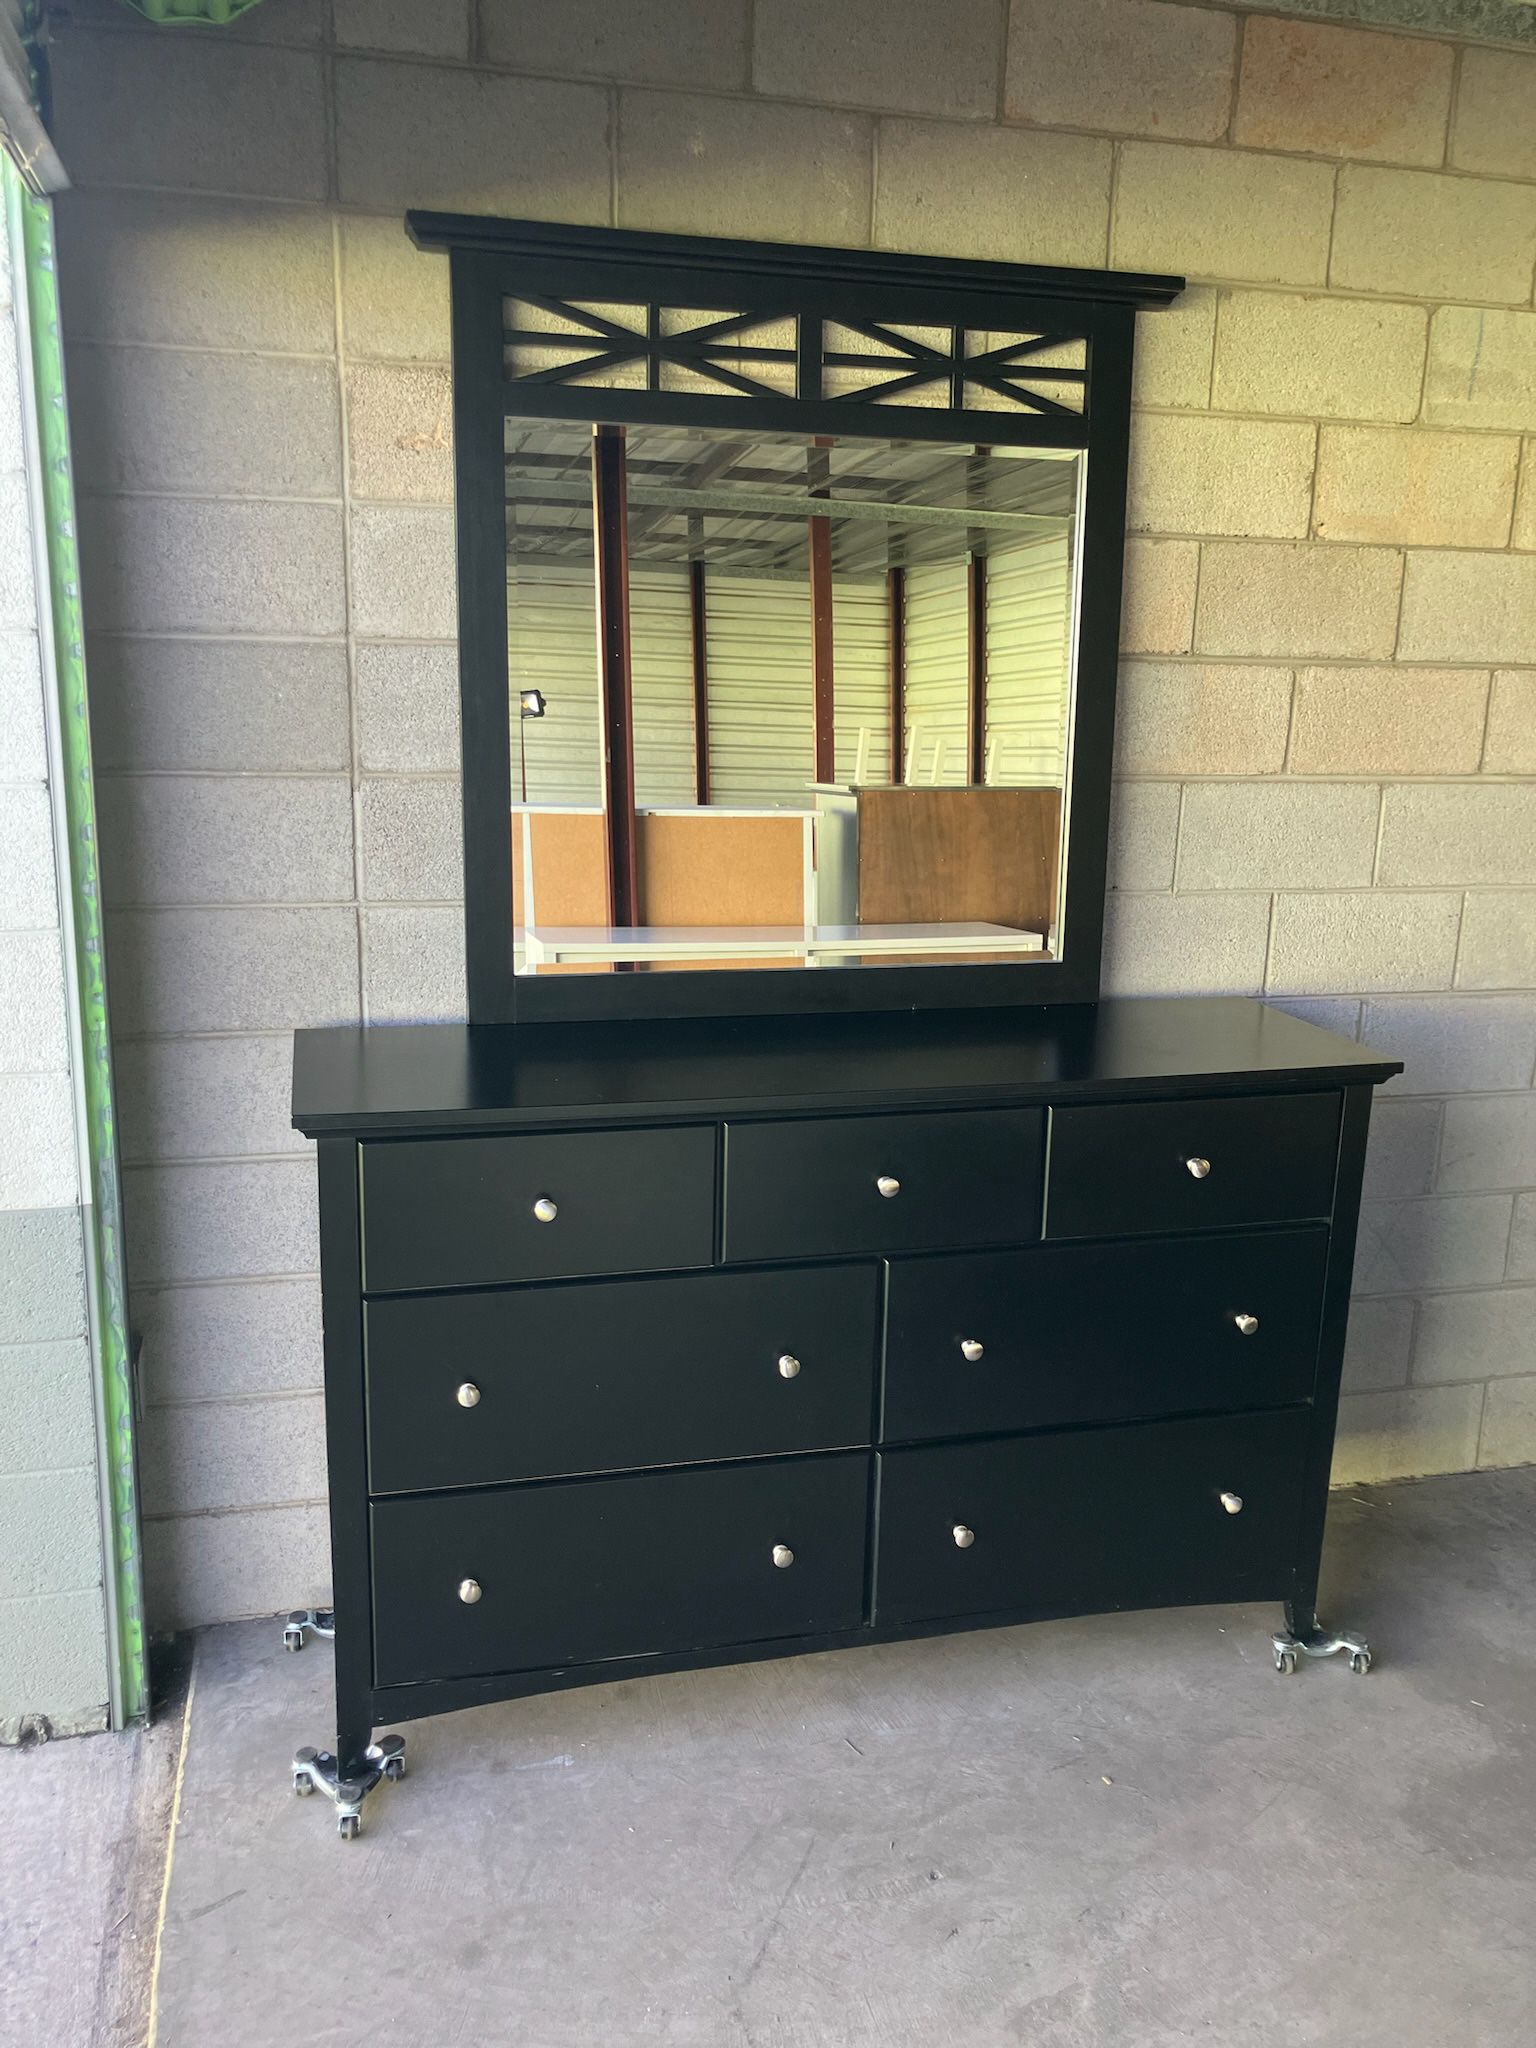 Solid Wood Black 7 Drawer Dresser with Mirror (Whole Set For Sale - See Profile) 